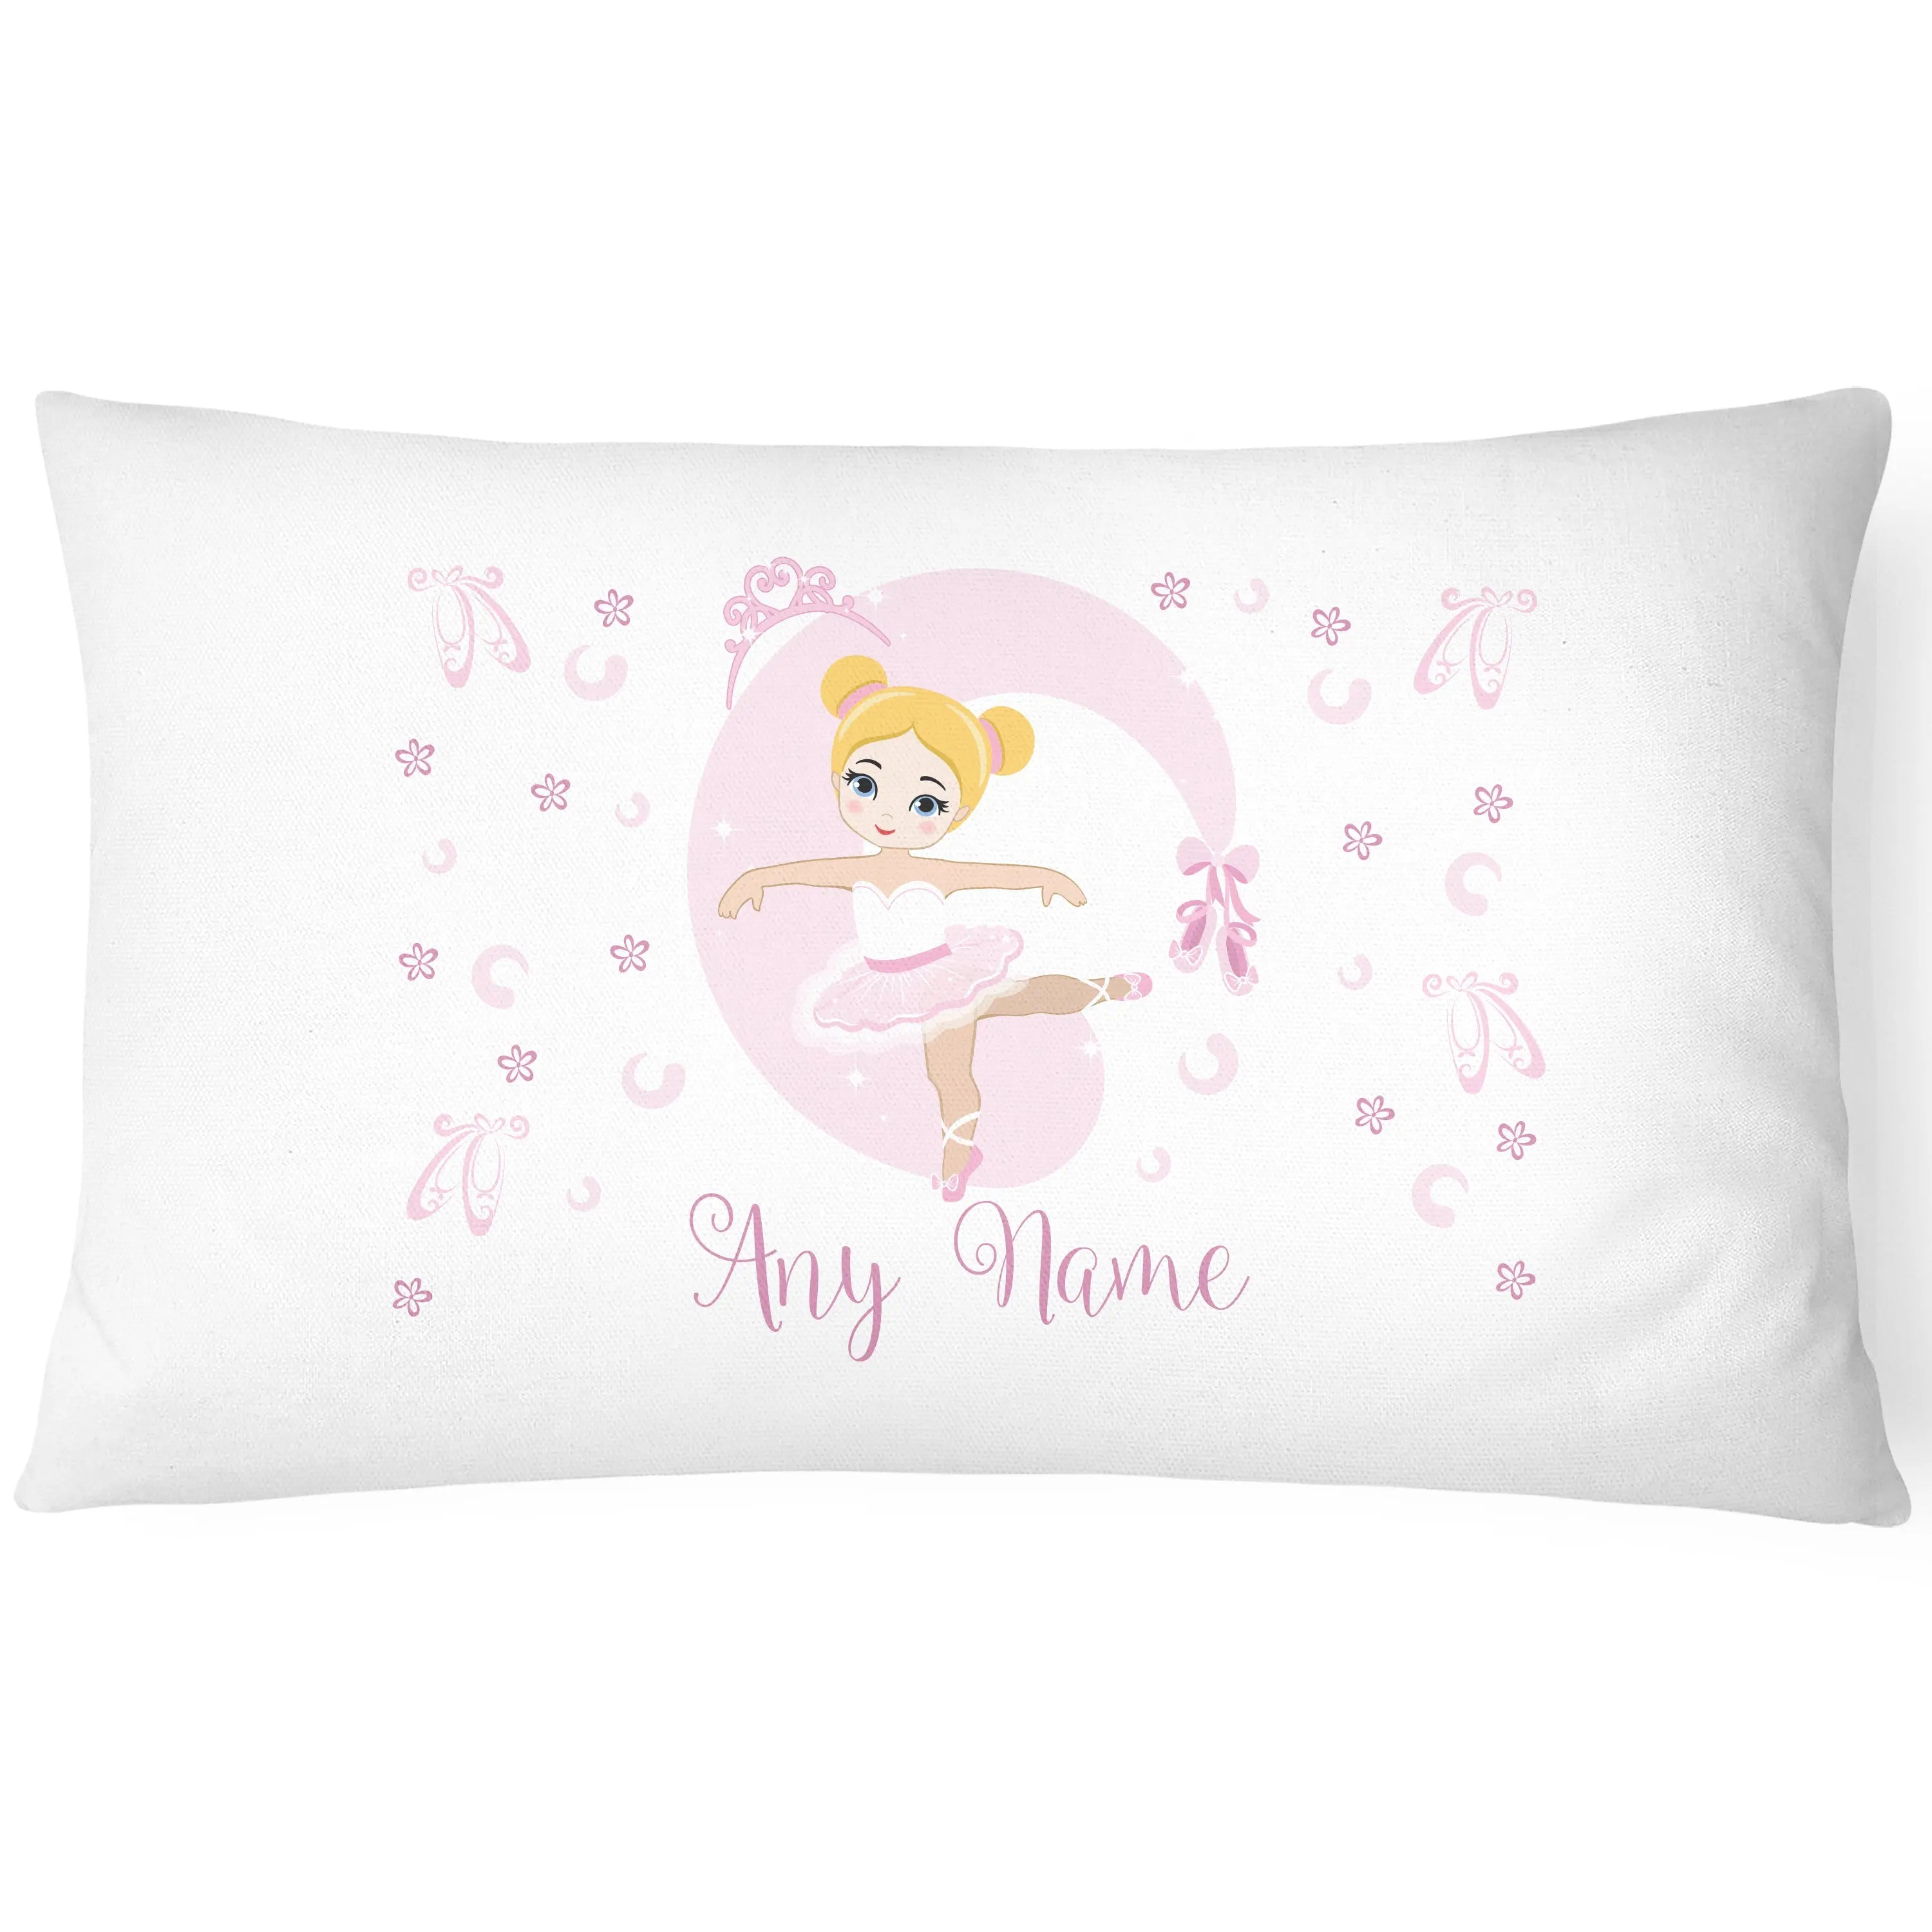 Ballerina Children's Pillowcase - Personalise with Any Name - Sweet - CushionPop